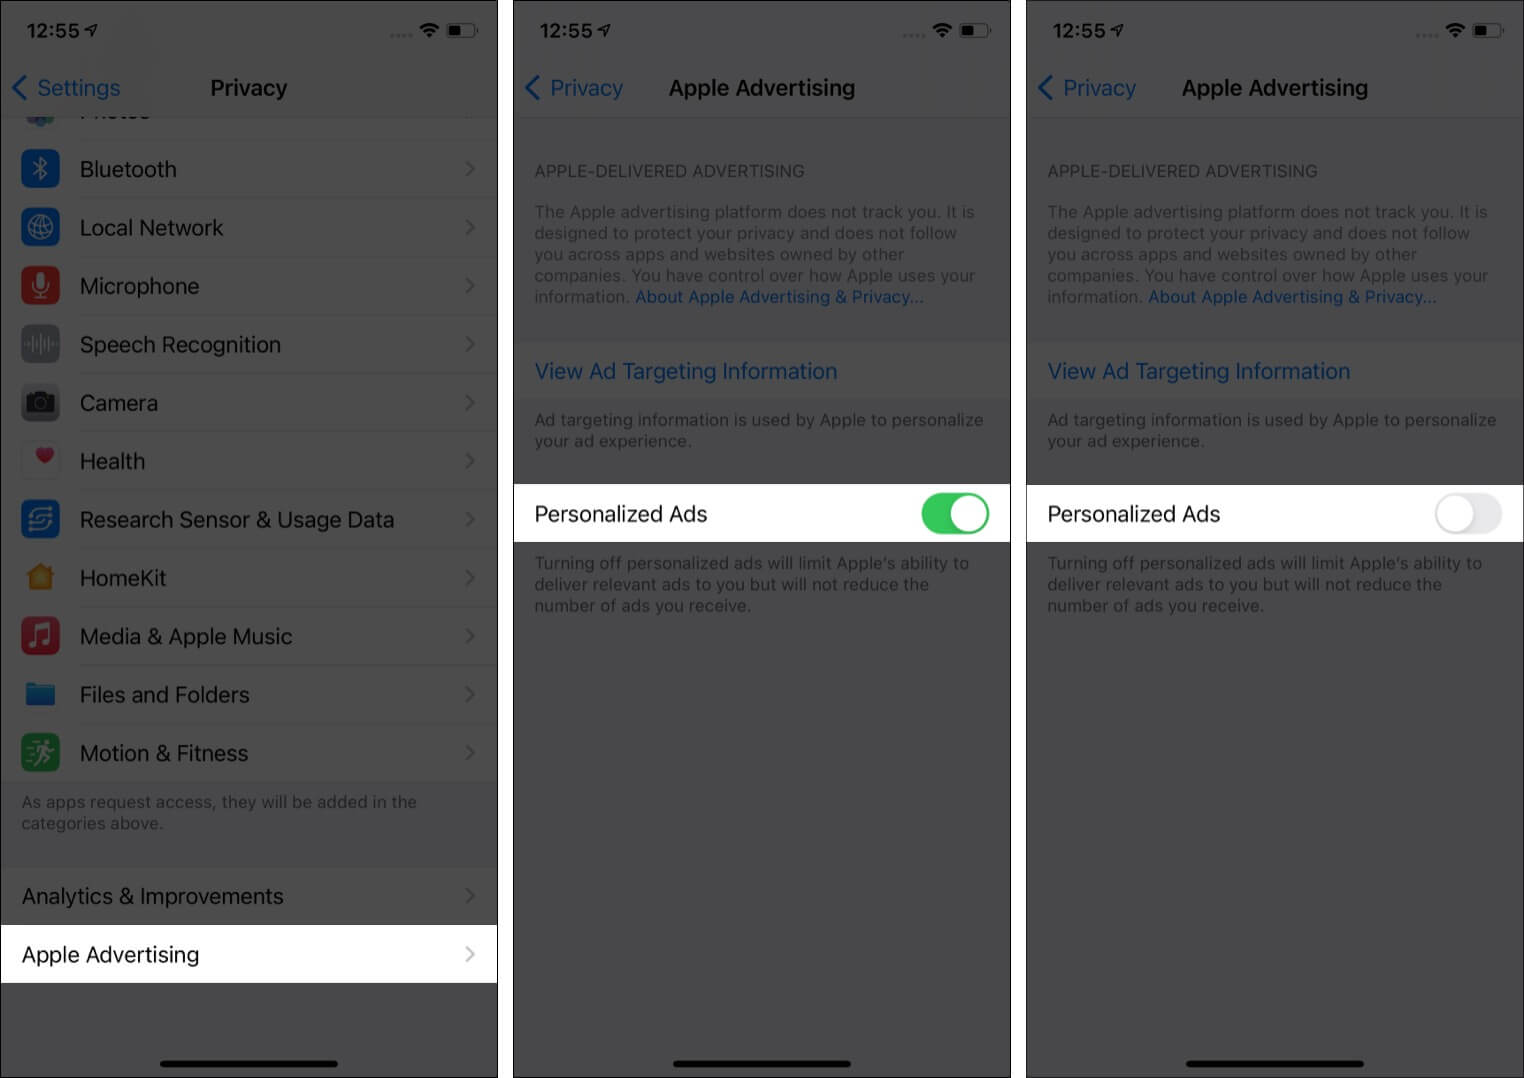 Turn off Personalized Ads on iPhone in iOS 14